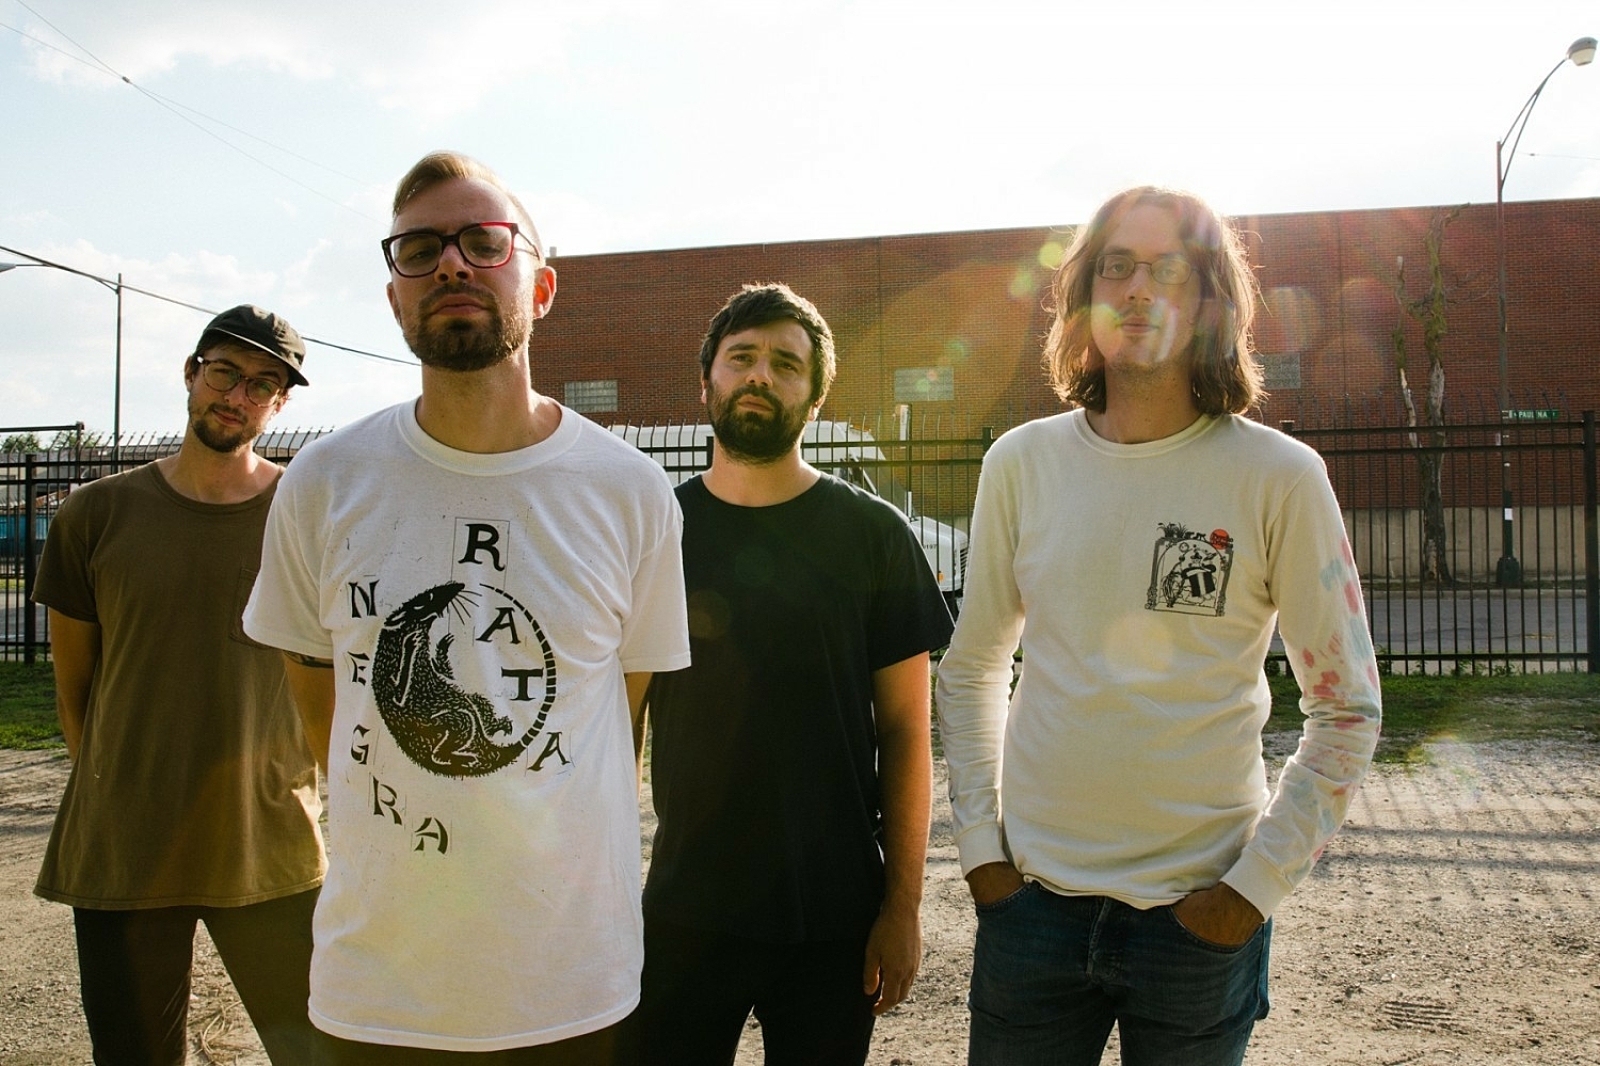 Cloud Nothings air animated video for ‘So Right So Clean’